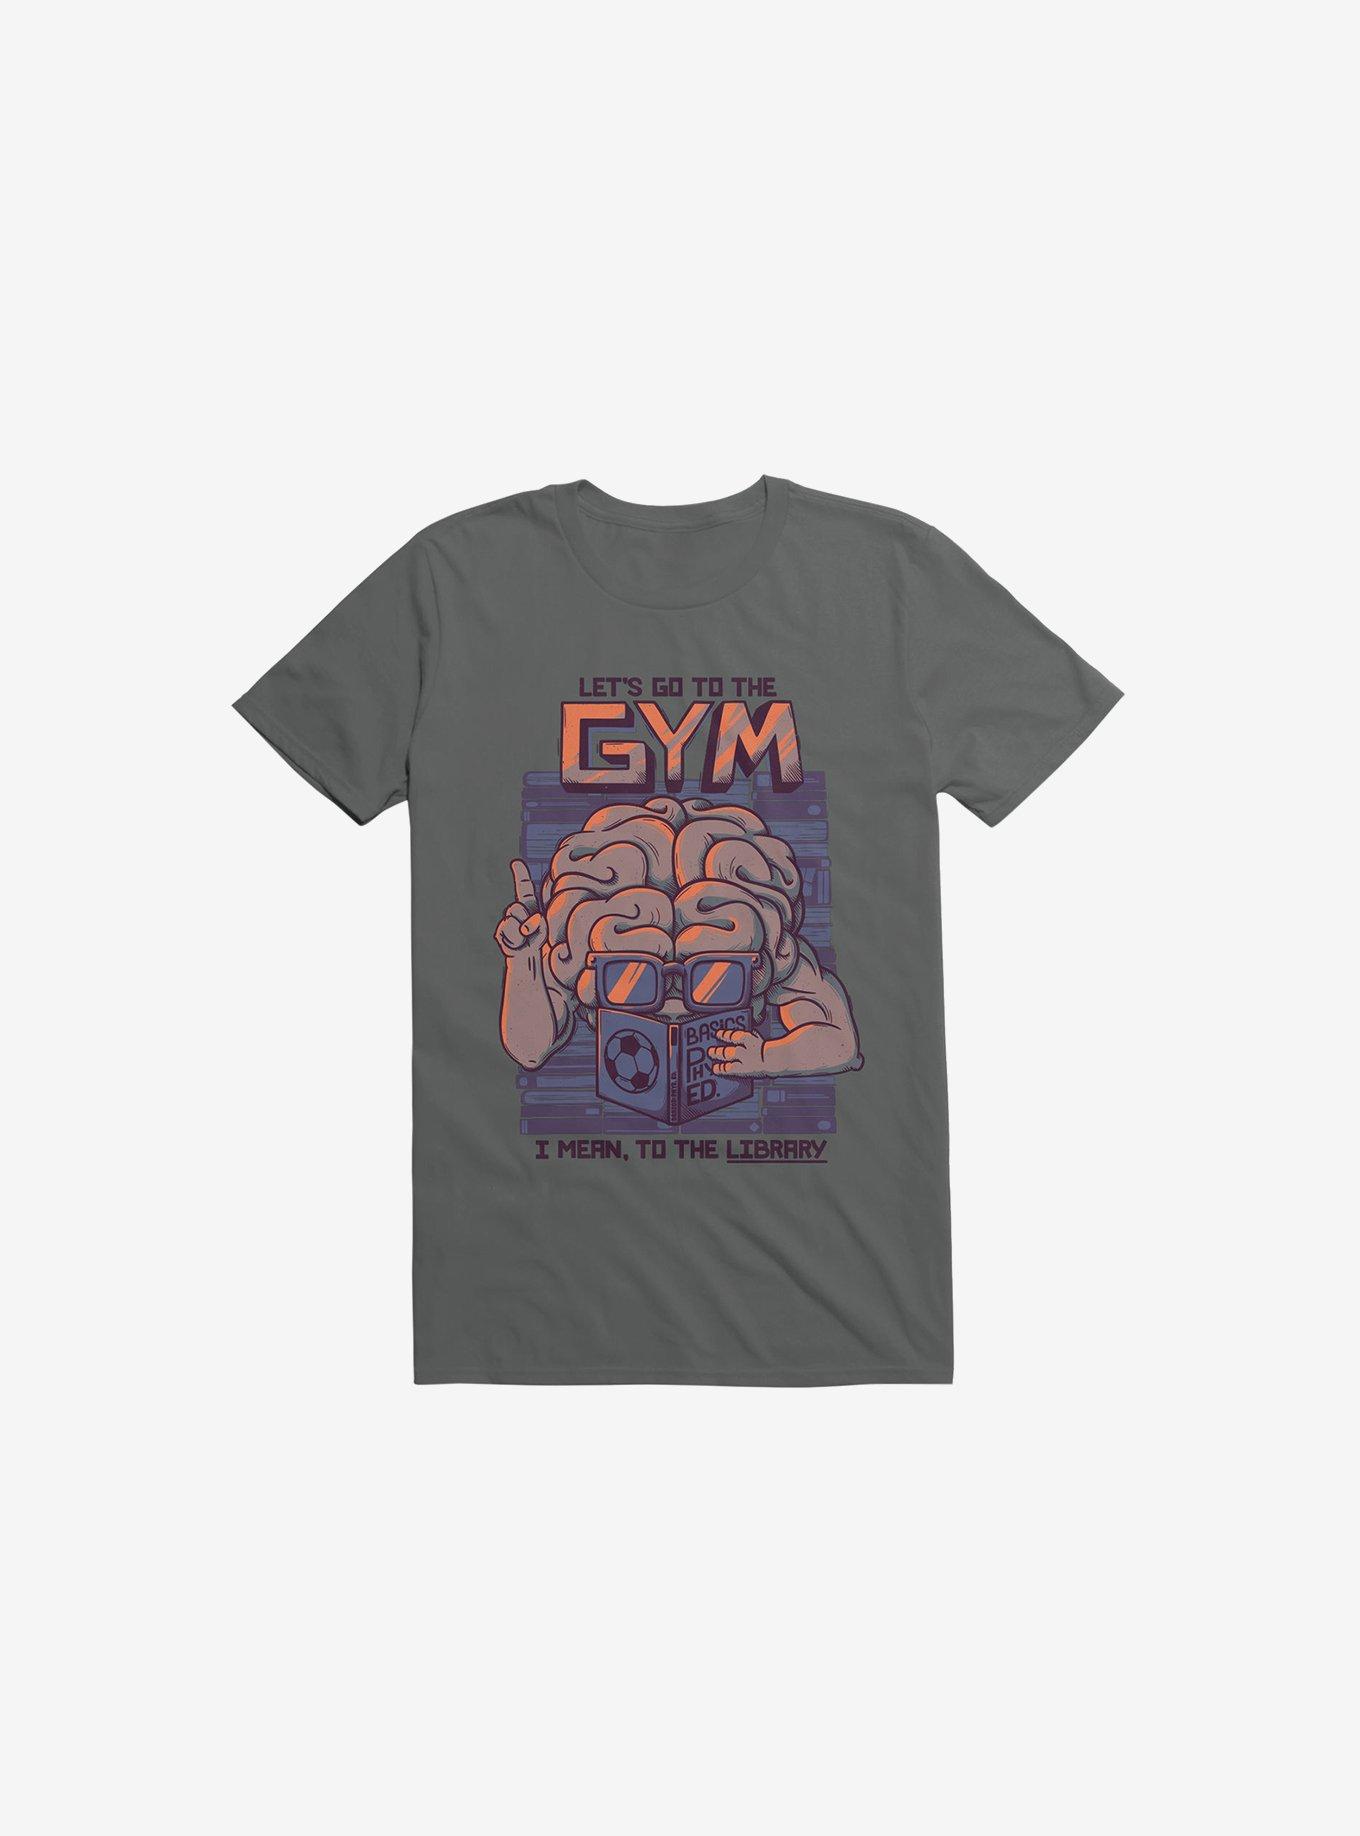 Let's Go To The Gym Charcoal Grey T-Shirt, , hi-res